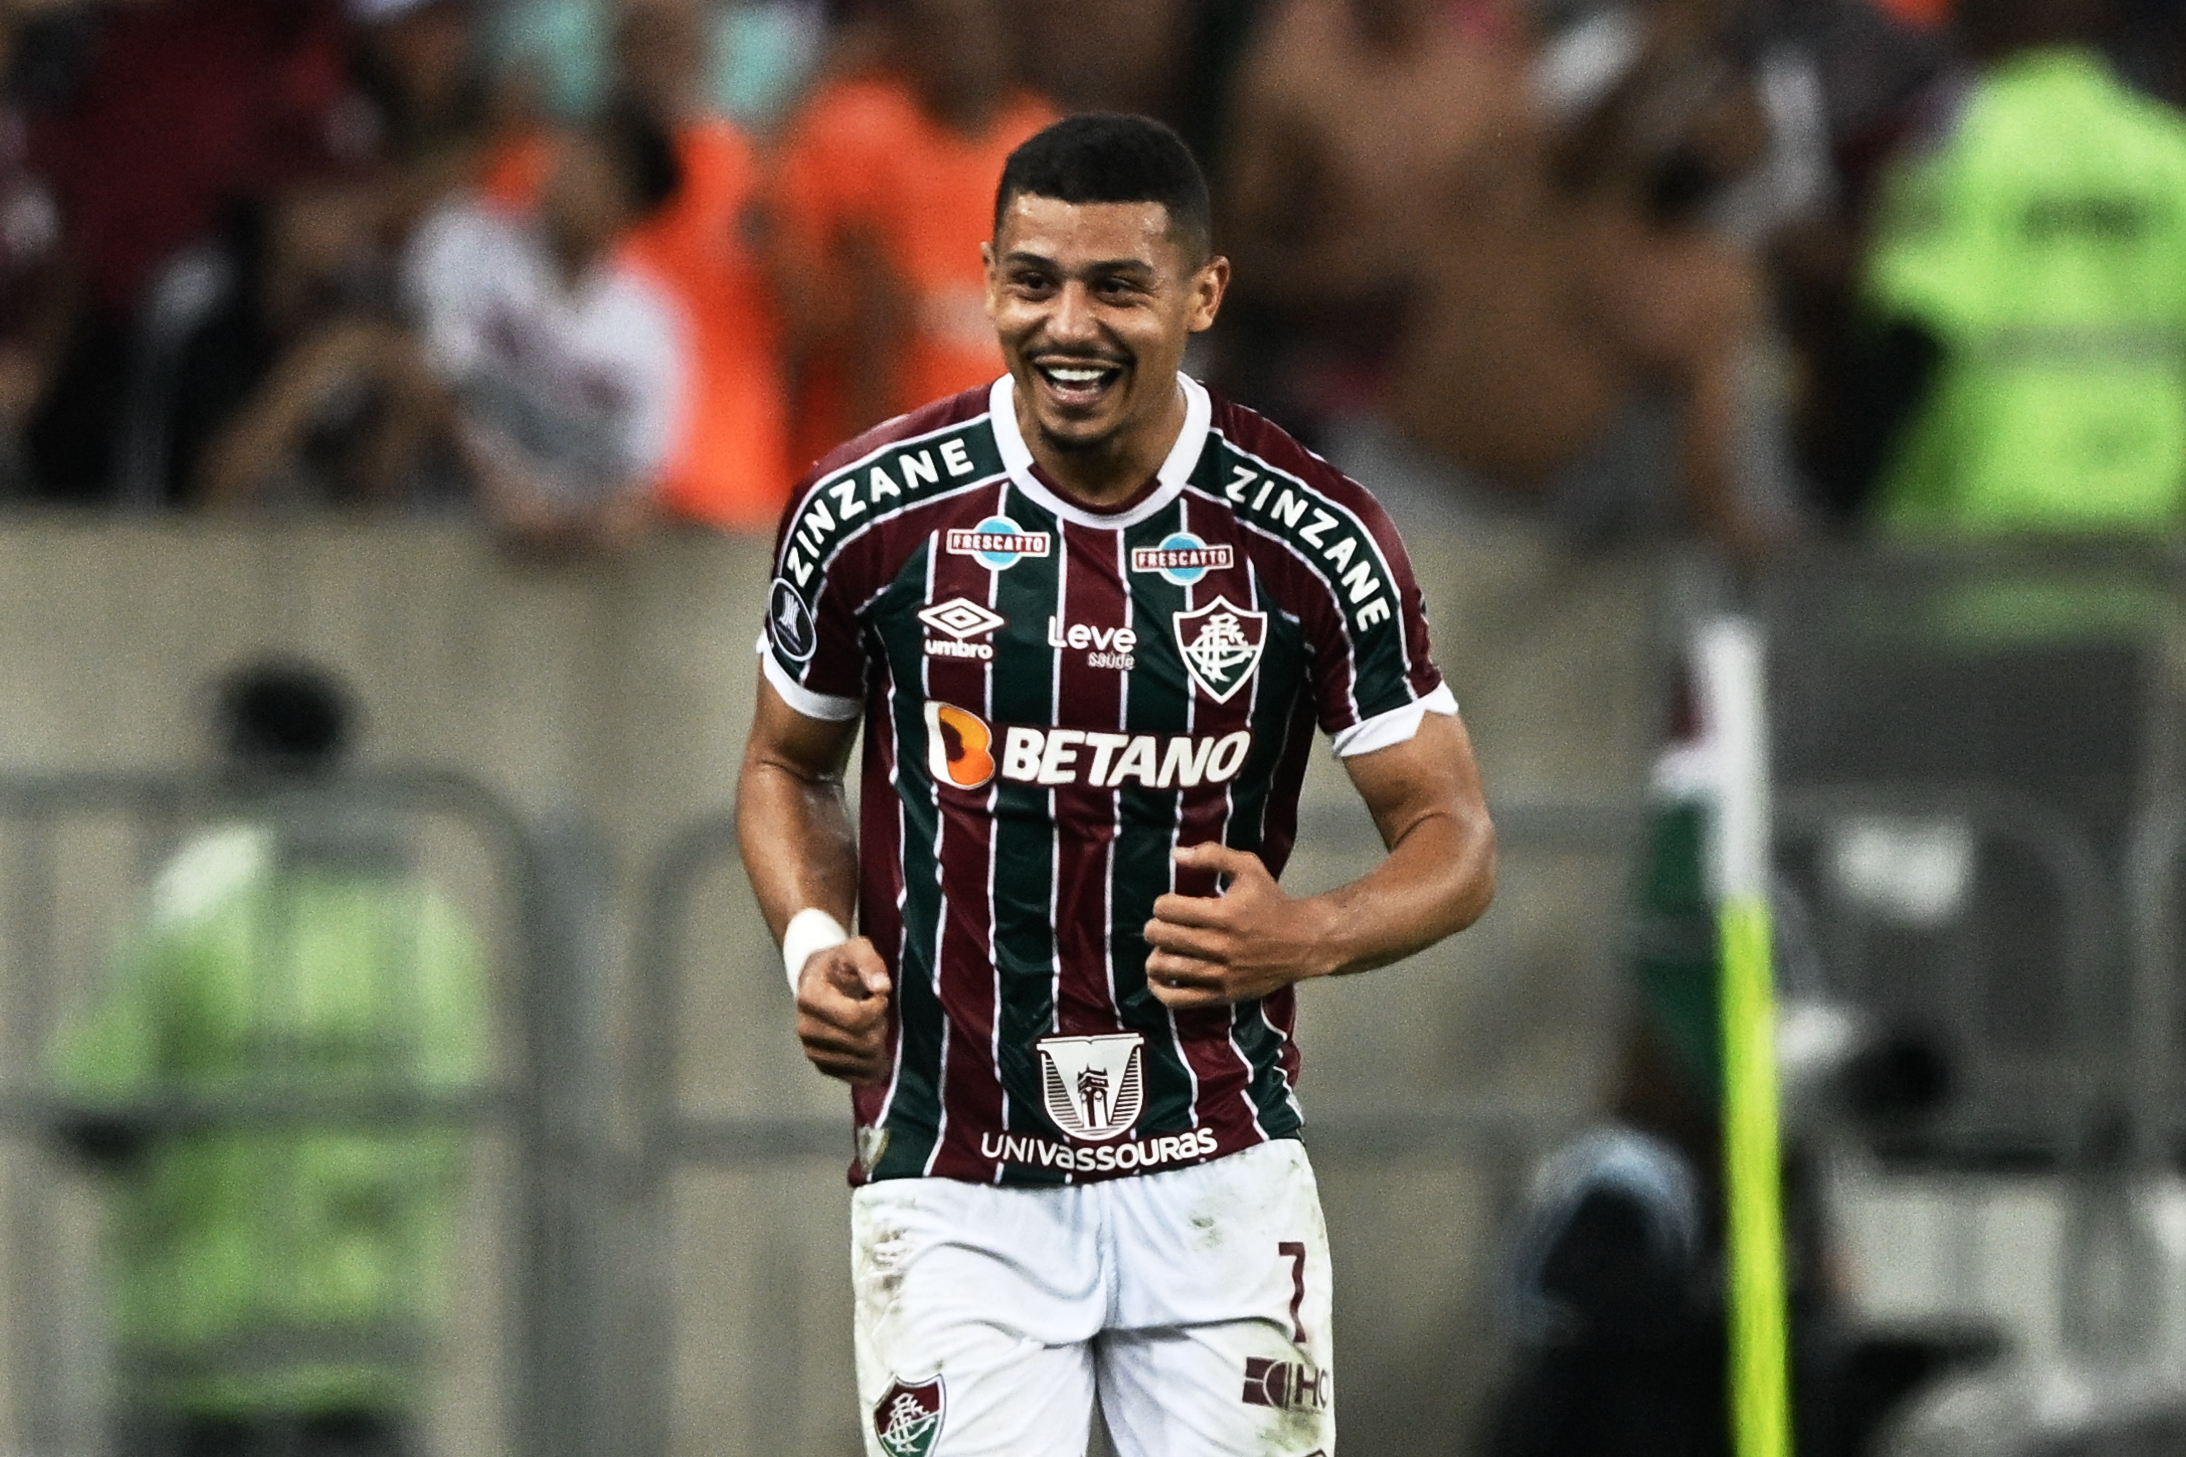 Fluminense's midfielder Andre Trindade celebrates after scoring during the Copa Libertadores quarterfinals first leg football match between Brazil's Fluminense and Paraguay's Olimpia, at the Maracana stadium in Rio de Janeiro, Brazil, on August 24, 2023. (Photo by MAURO PIMENTEL / AFP) (Photo by MAURO PIMENTEL/AFP via Getty Images)